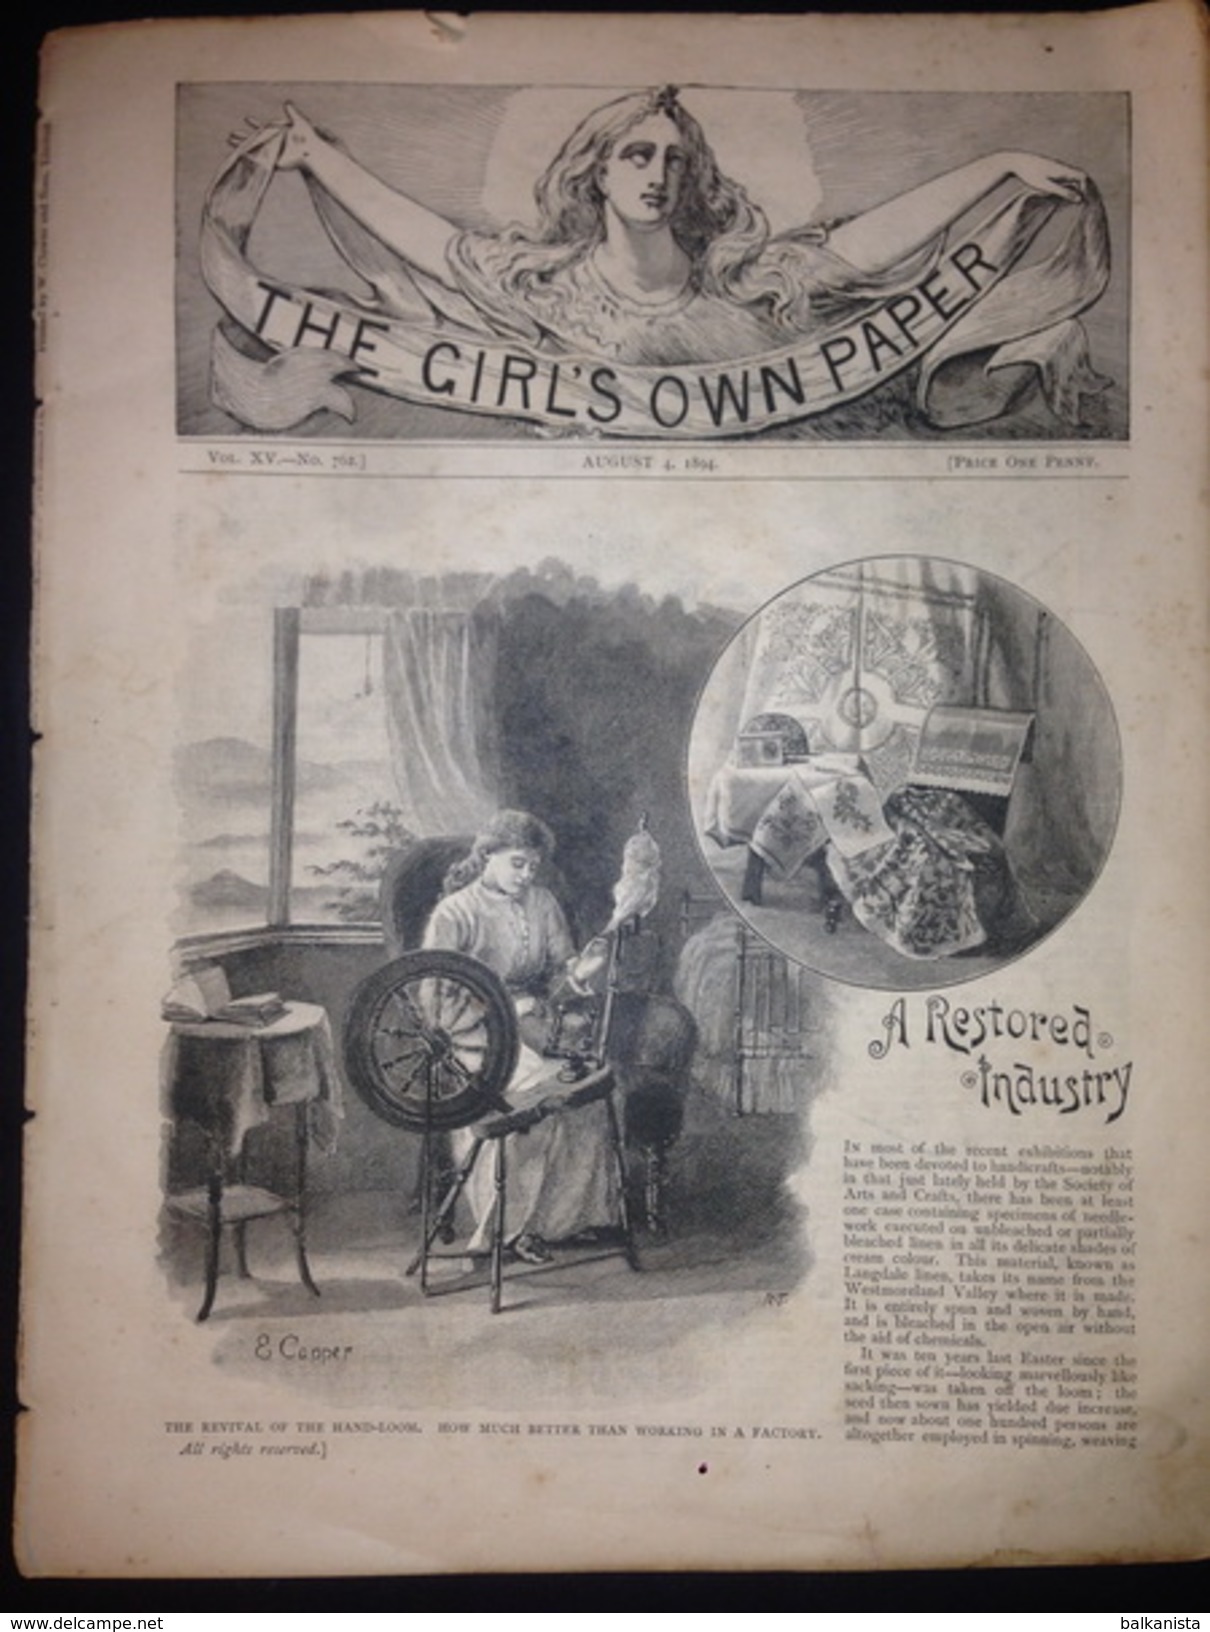 The Girl's Own Paper August 4, 1894 No: 762 - Women's